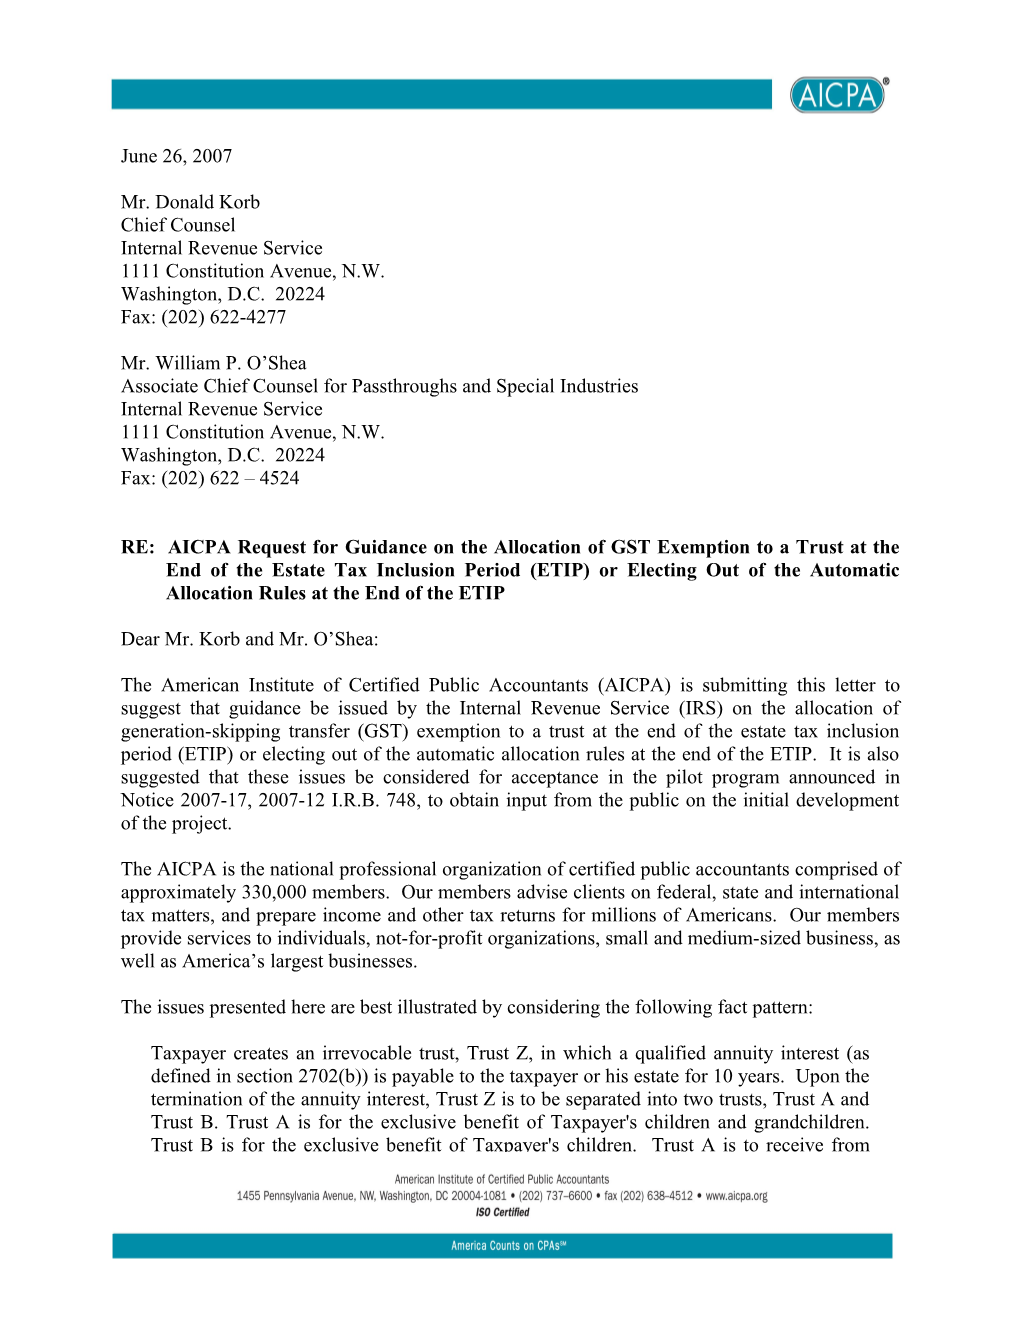 AICPA Letter to IRS on Allocation of GST Exemption at the End of the ETIP - June 26, 2007